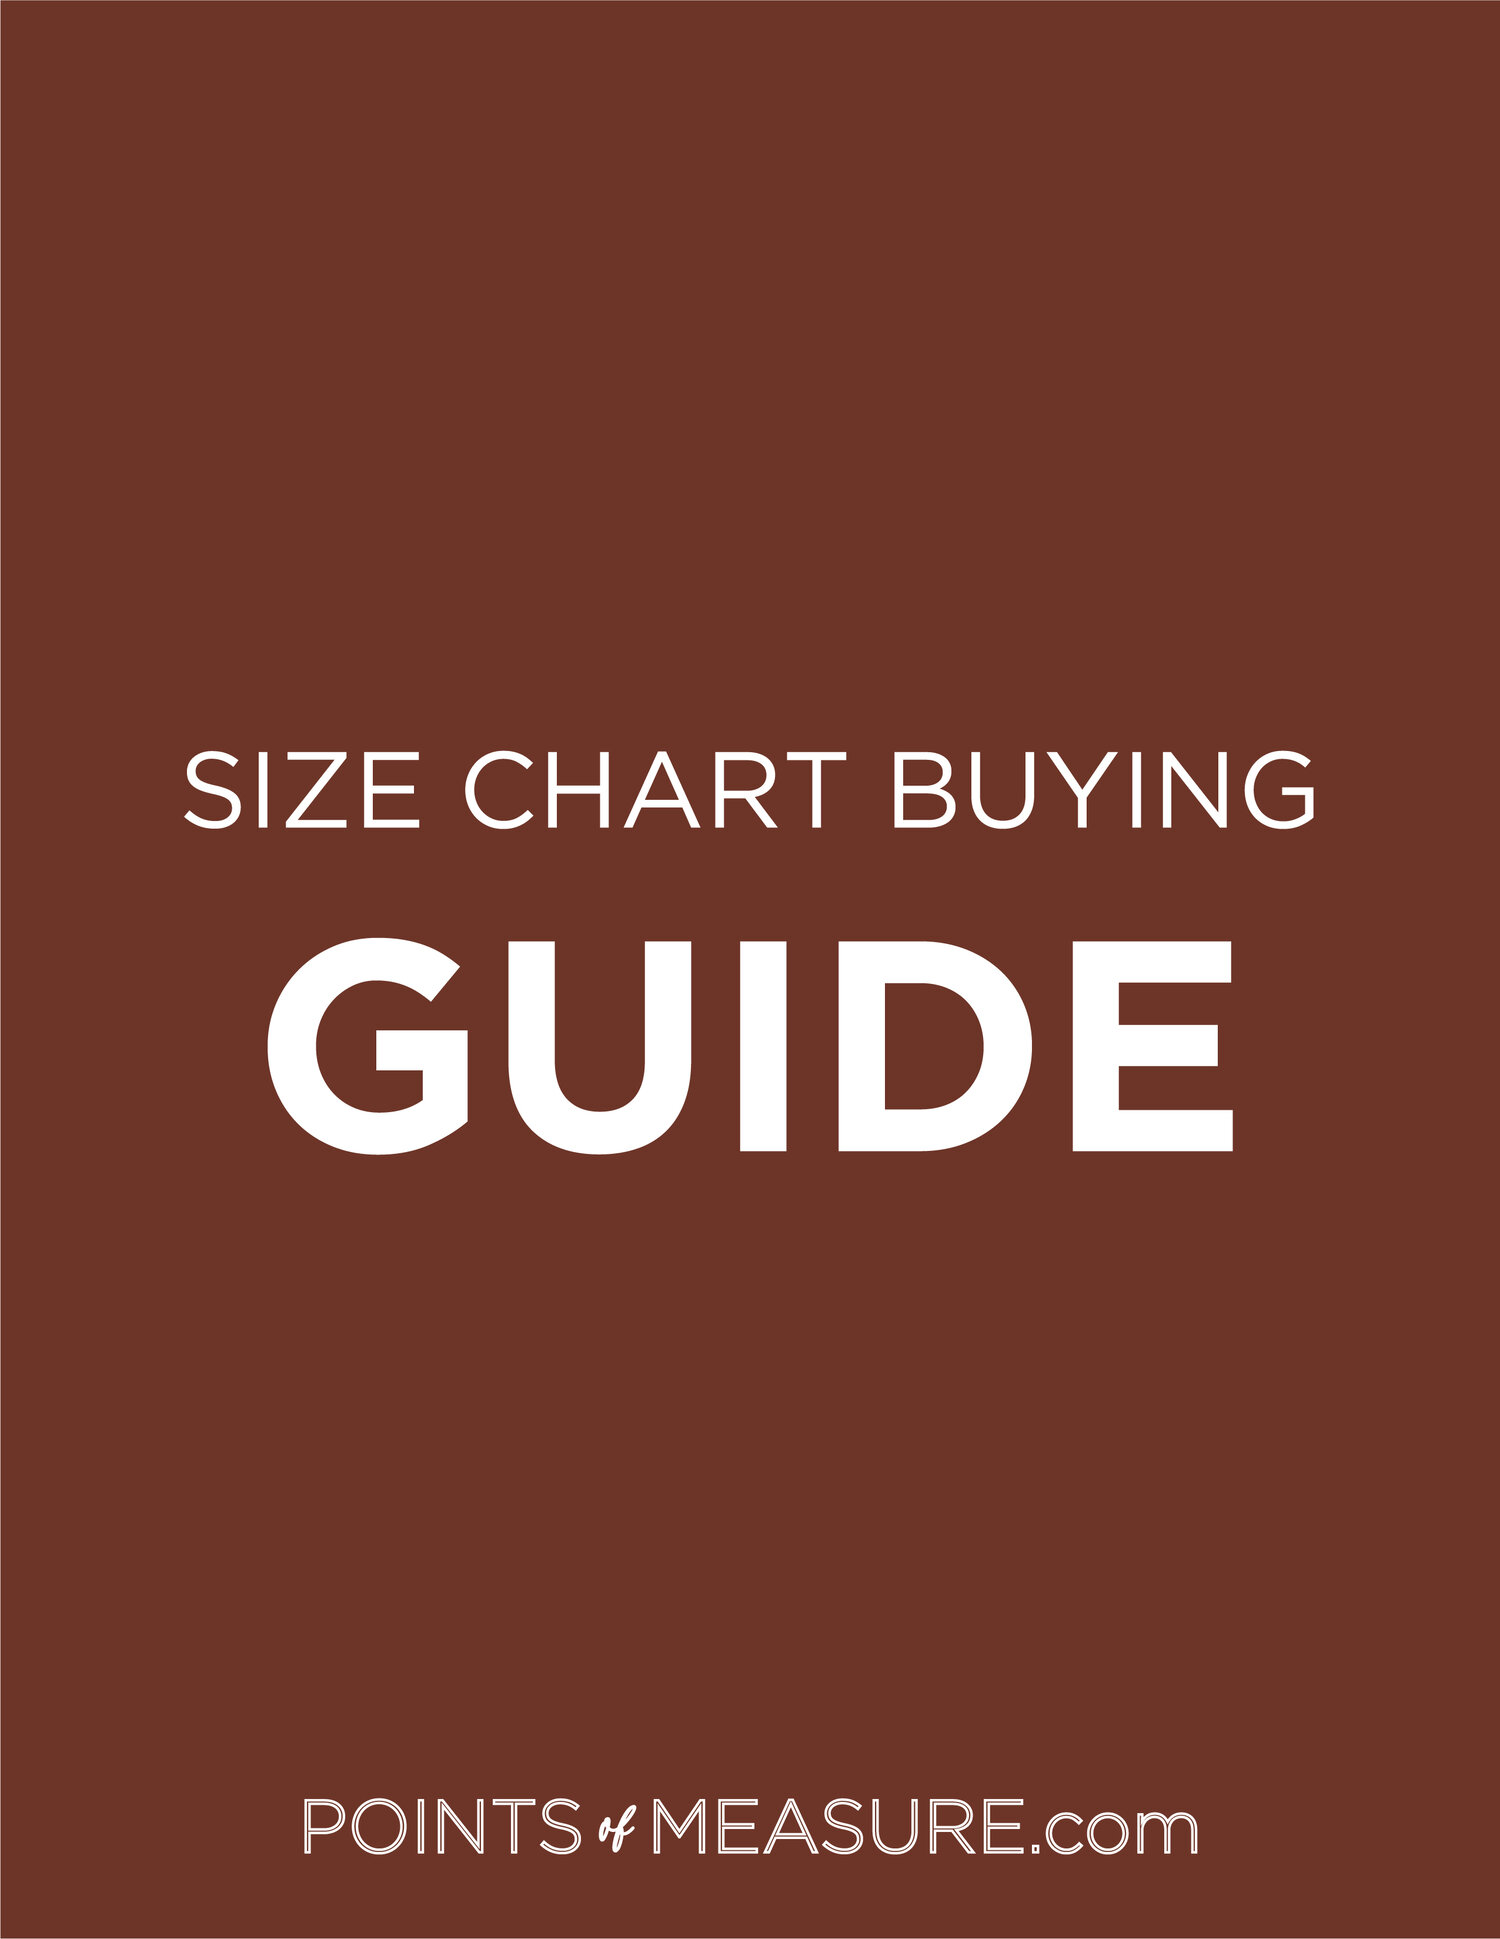 The Size Chart Guide — Points of Measure